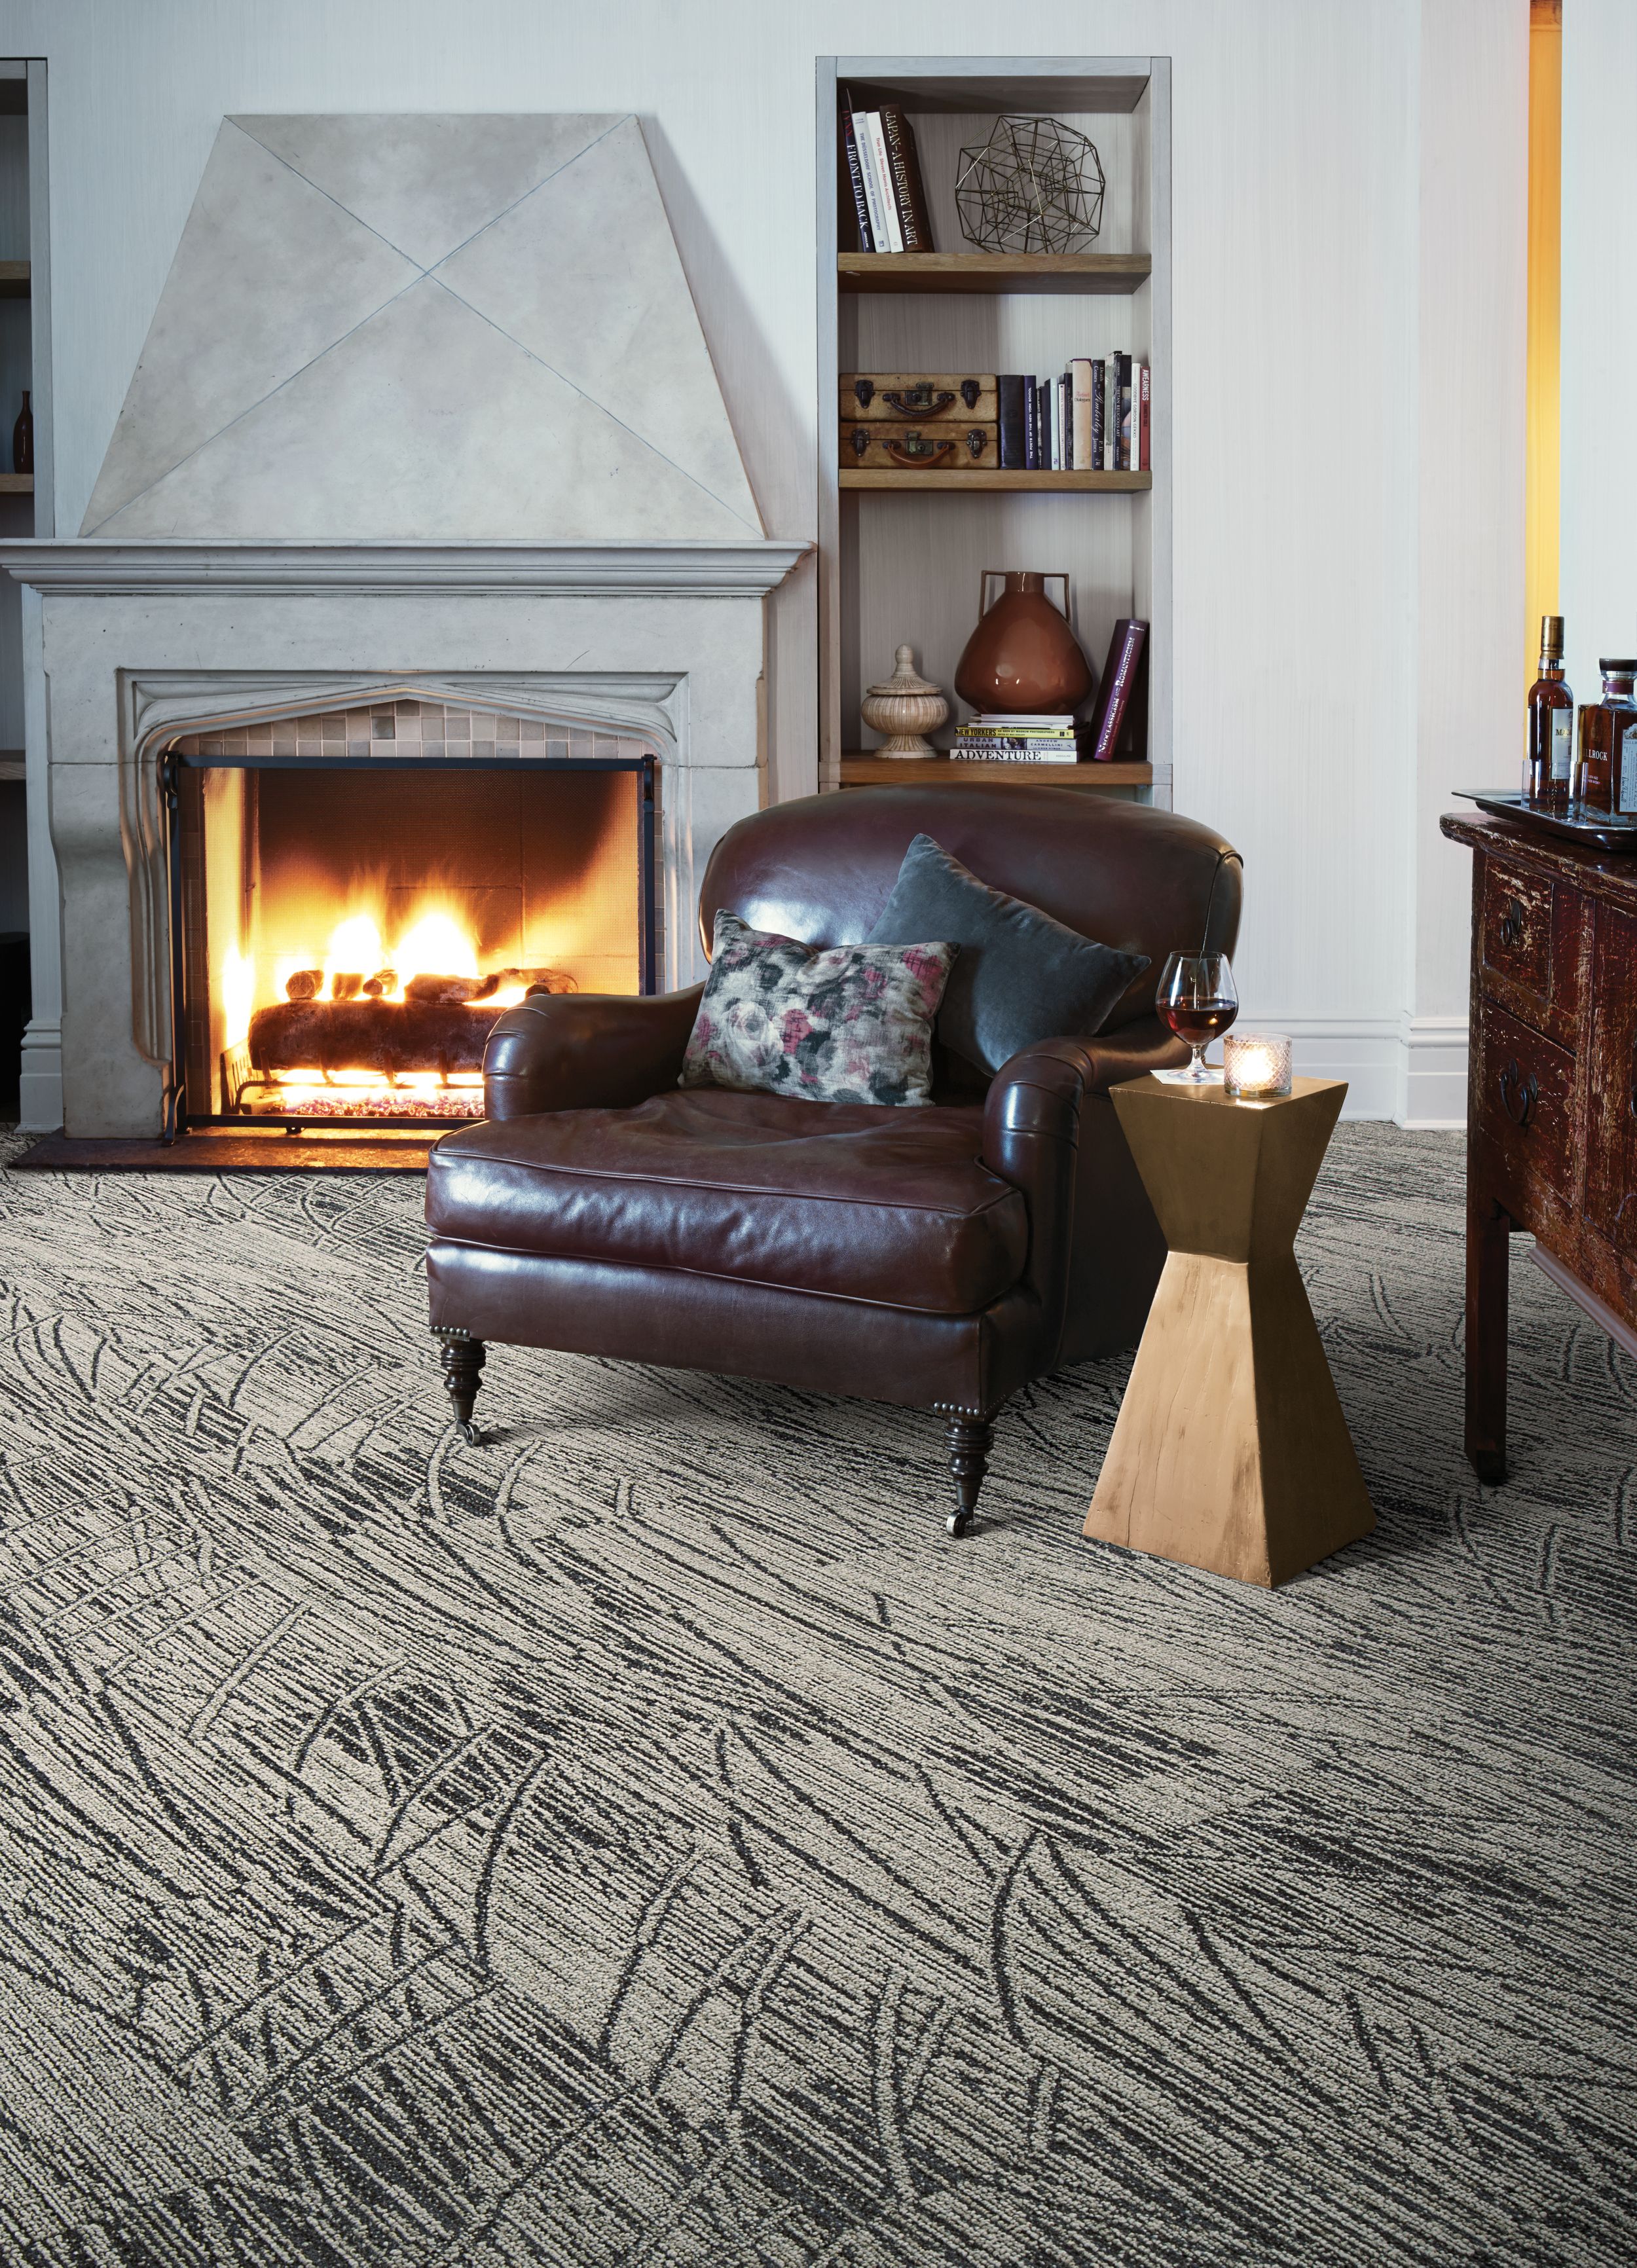 Interface WE152 plank carpet tile in sitting area with fireplace and large leather chair imagen número 2